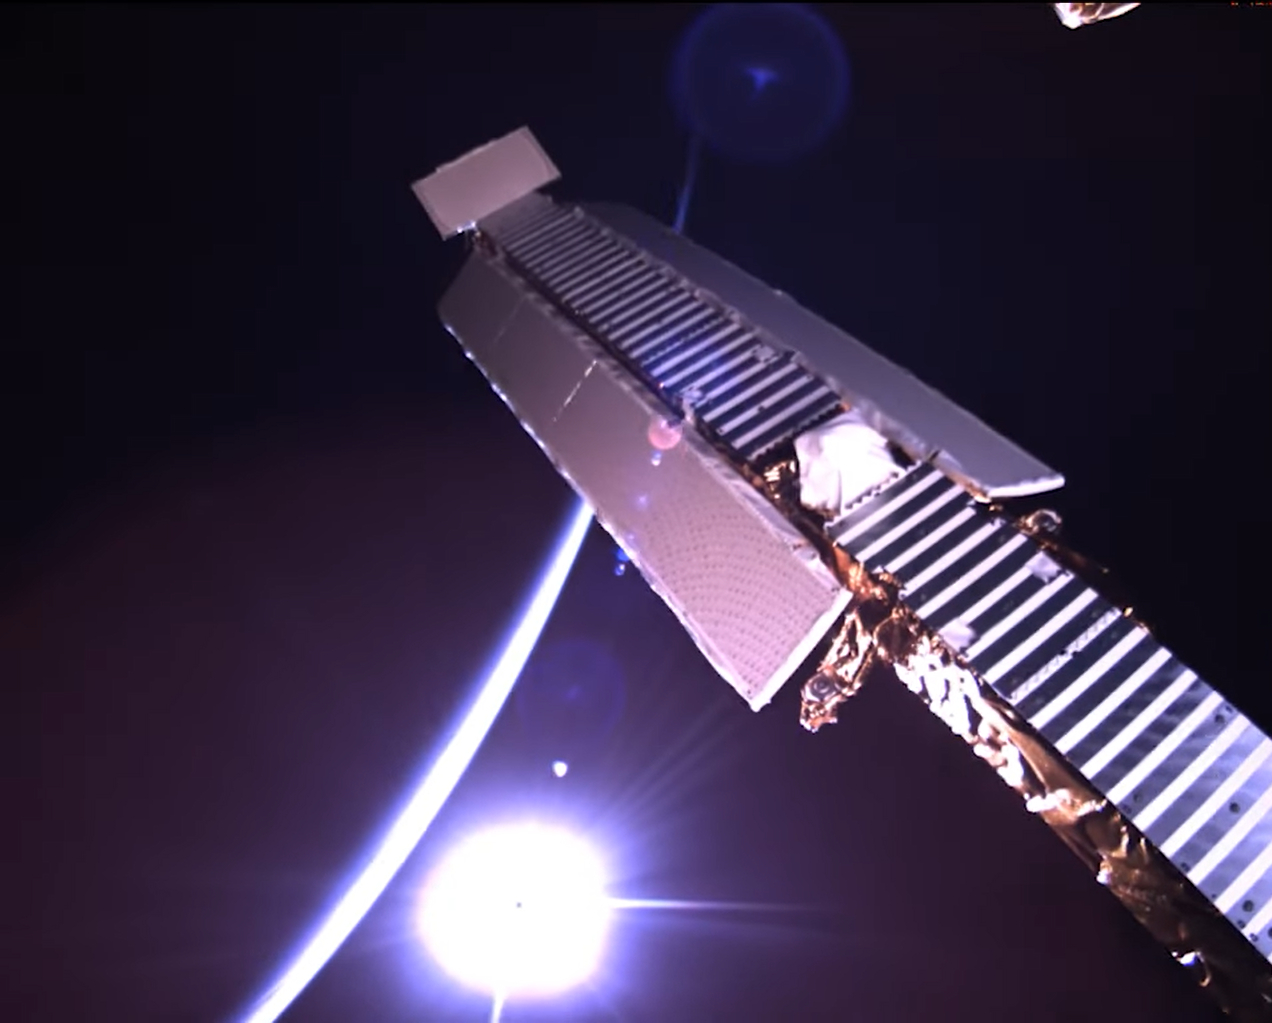 Watch NASA's SWOT satellite unfold in space to map Earth's water in stunning video